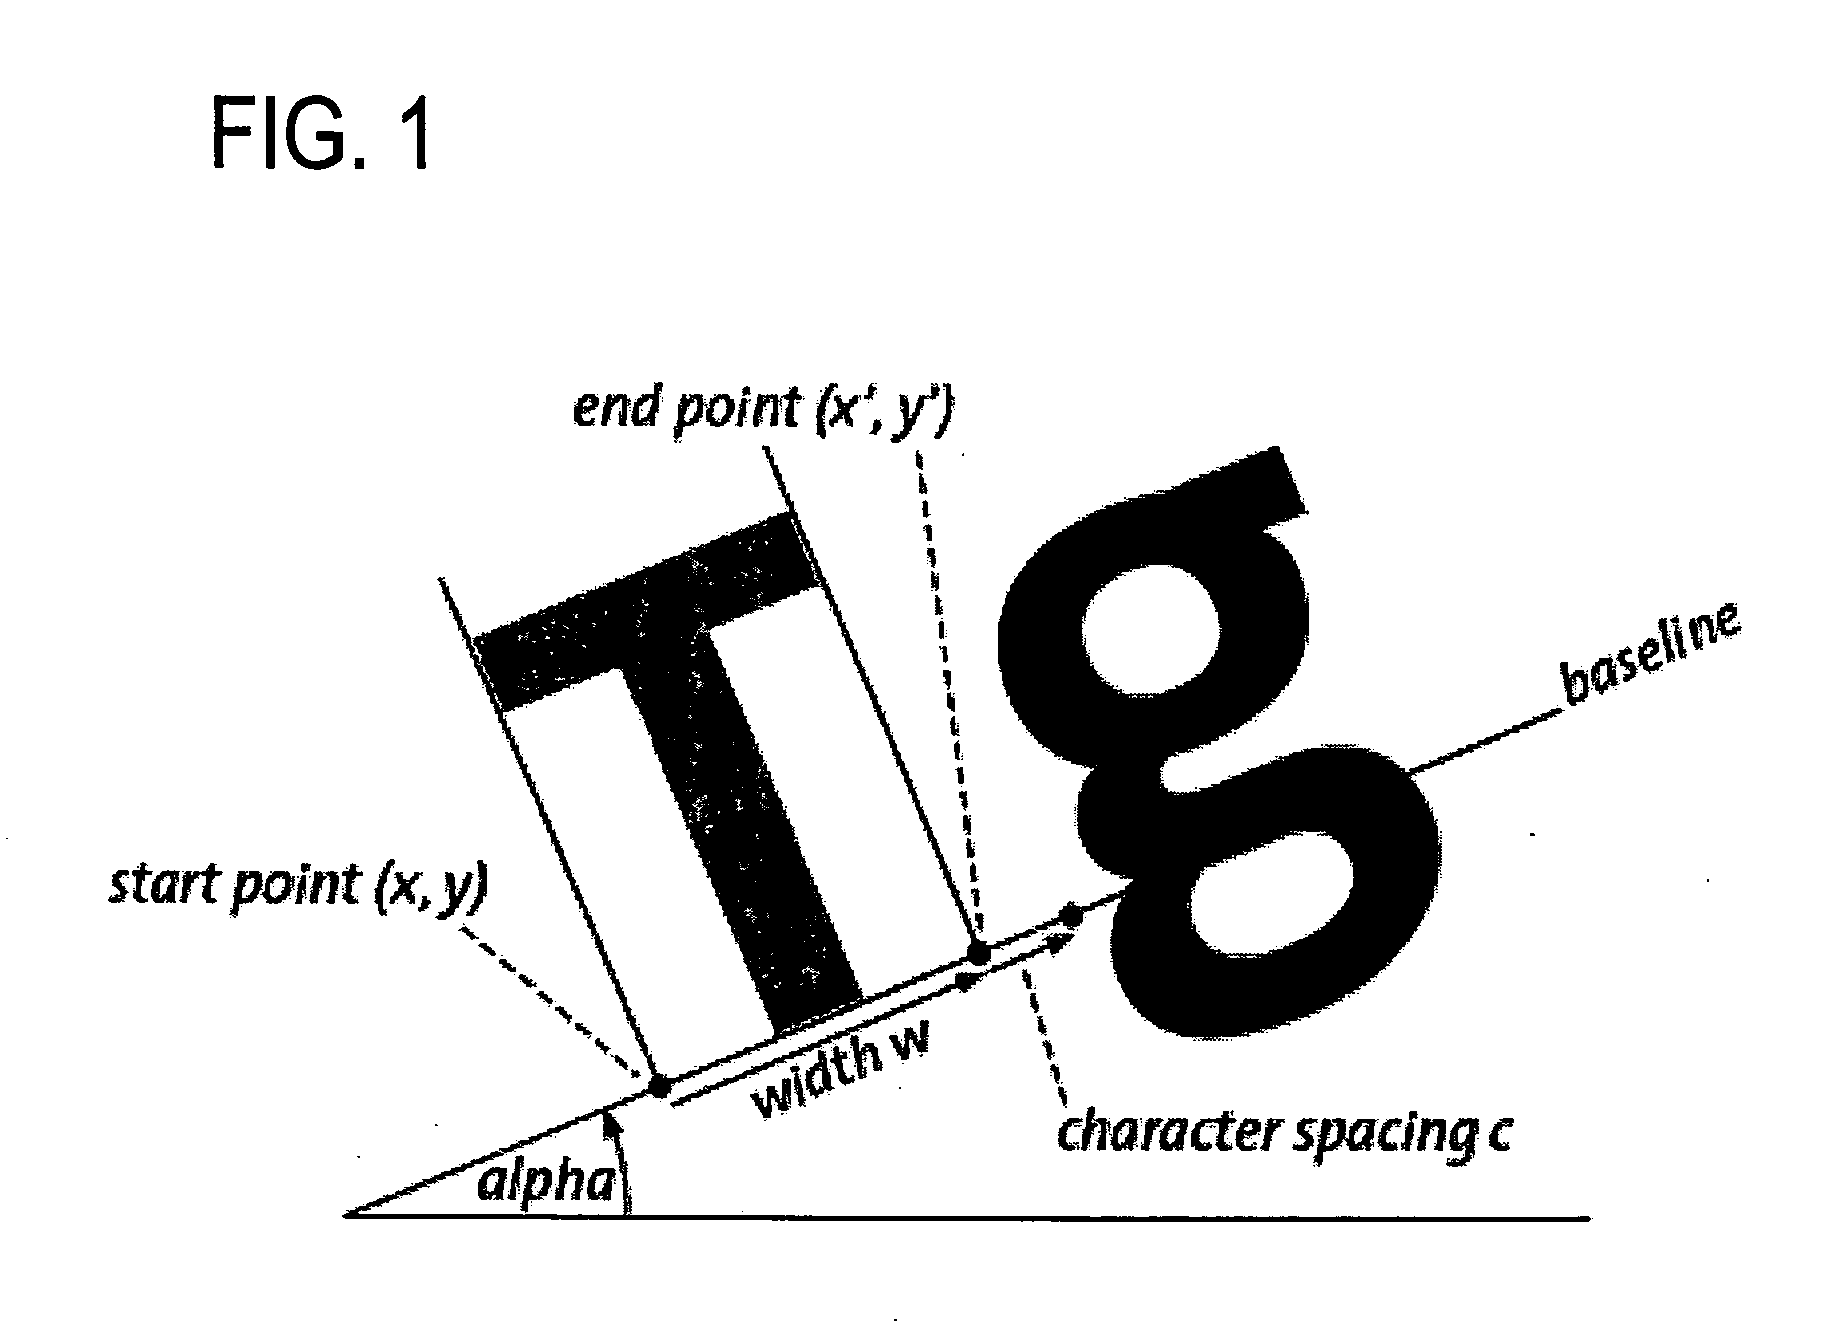 Method of identifying semantic units in an electronic document